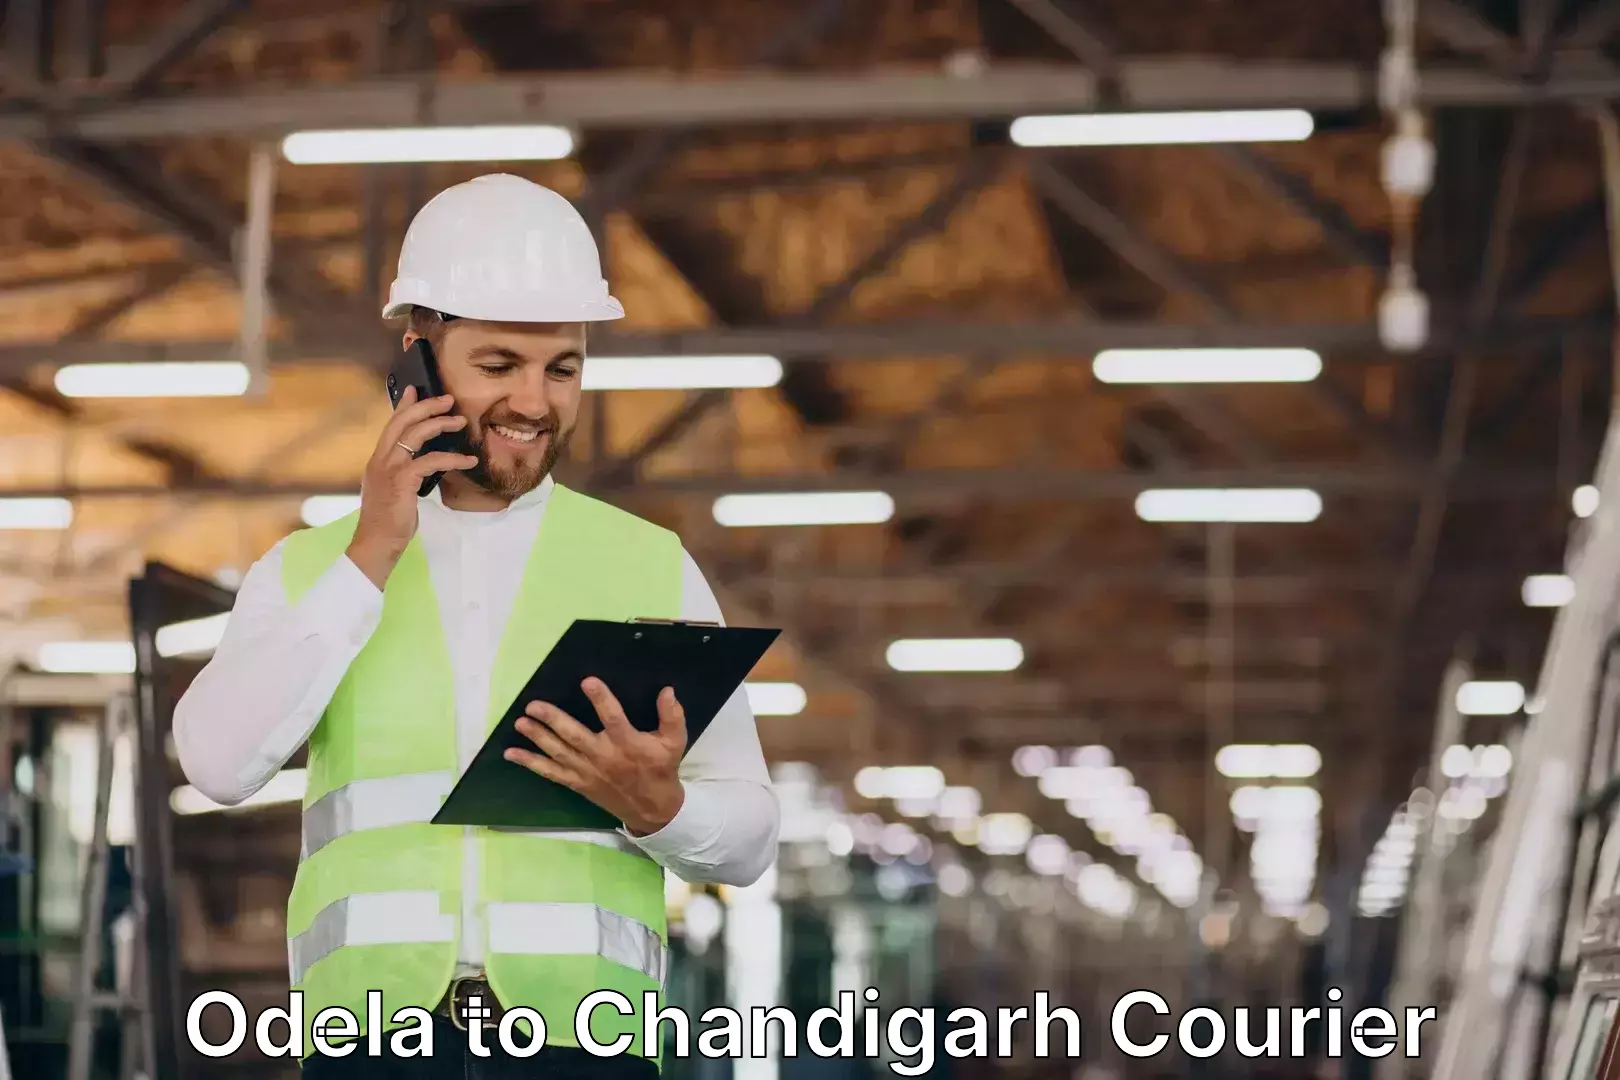 Luggage transport consultancy Odela to Chandigarh